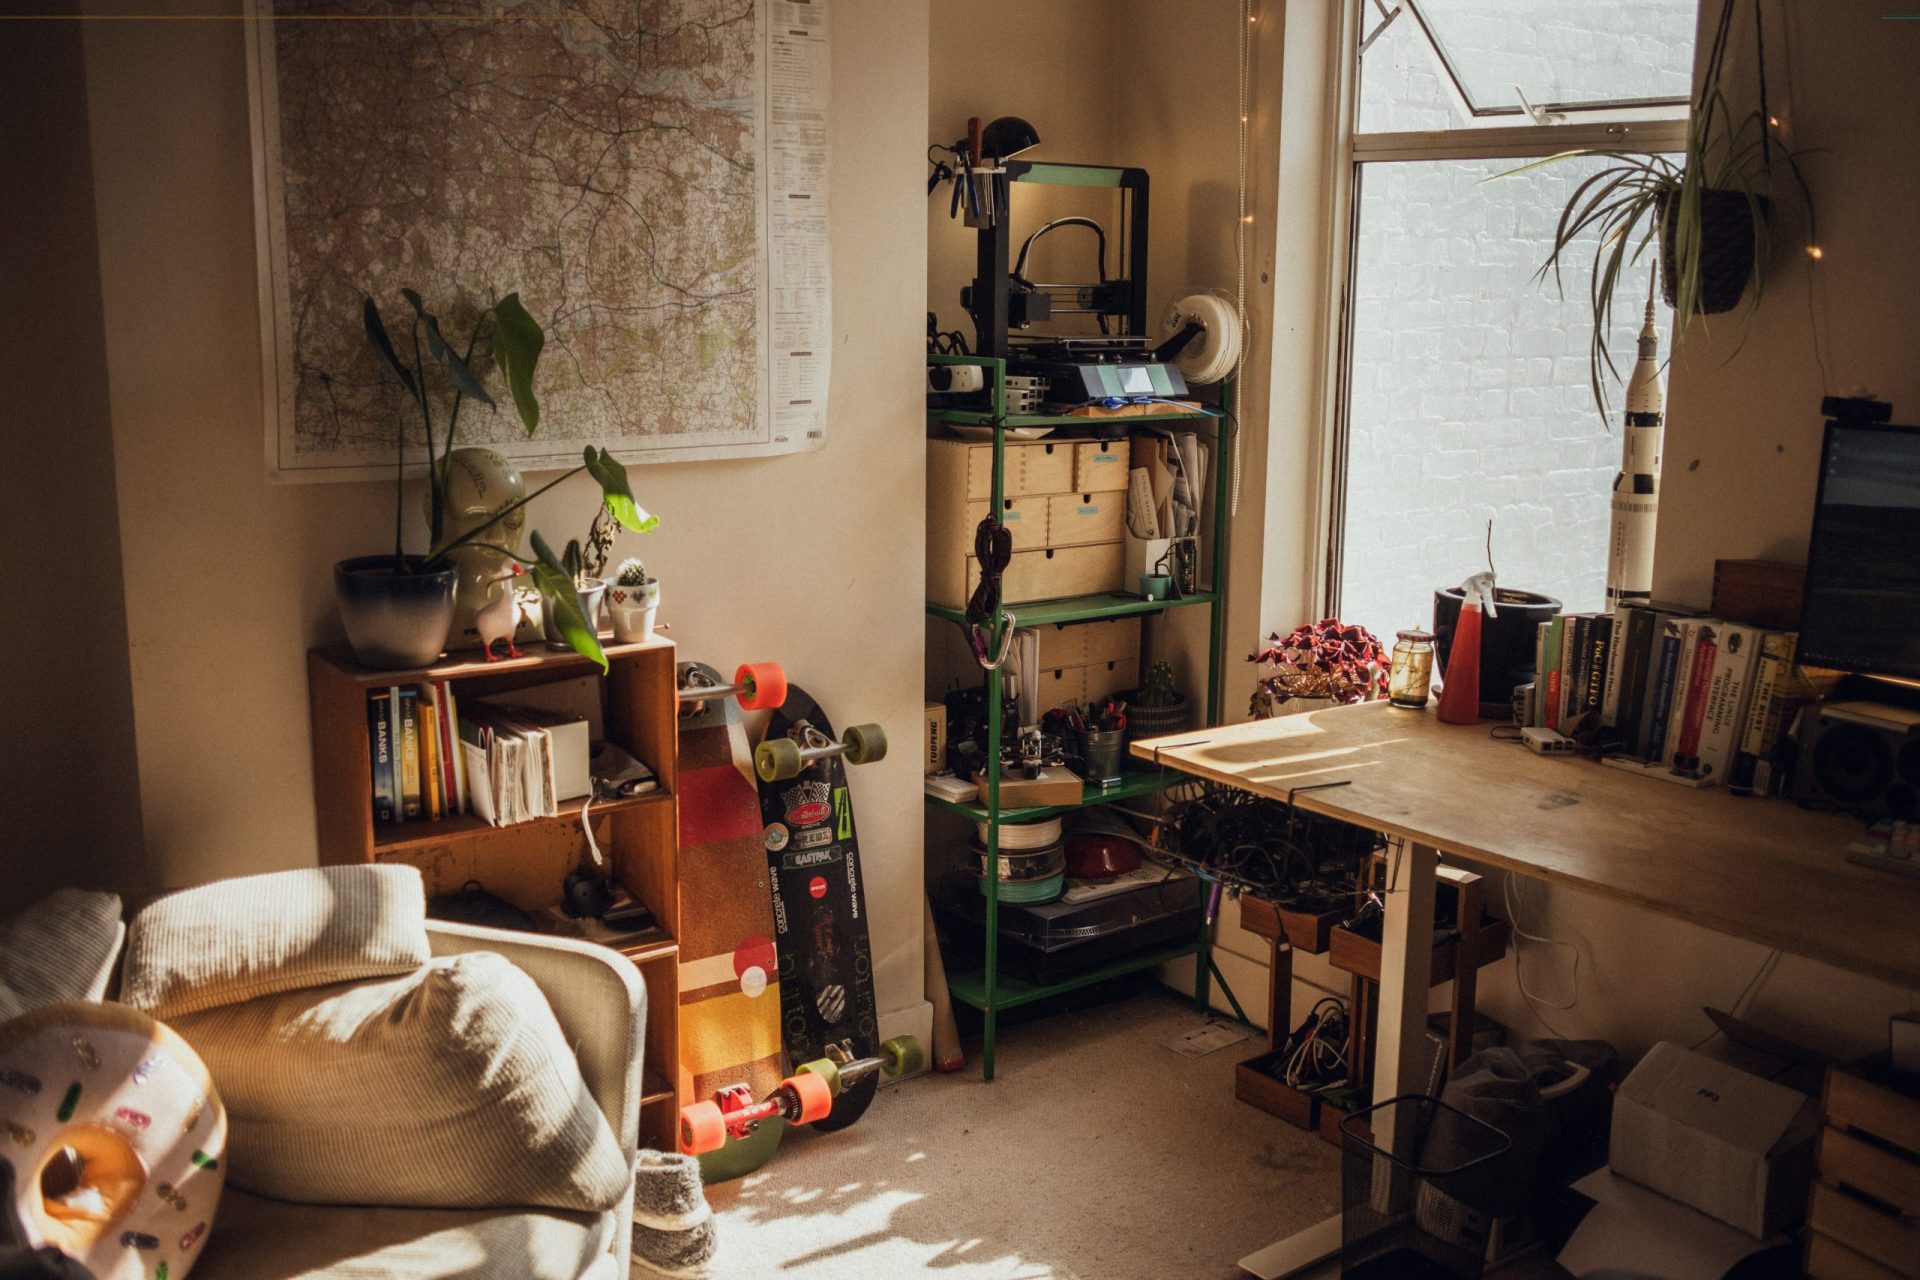 A room is filled with items that can be sorted through with set rules for decluttering.